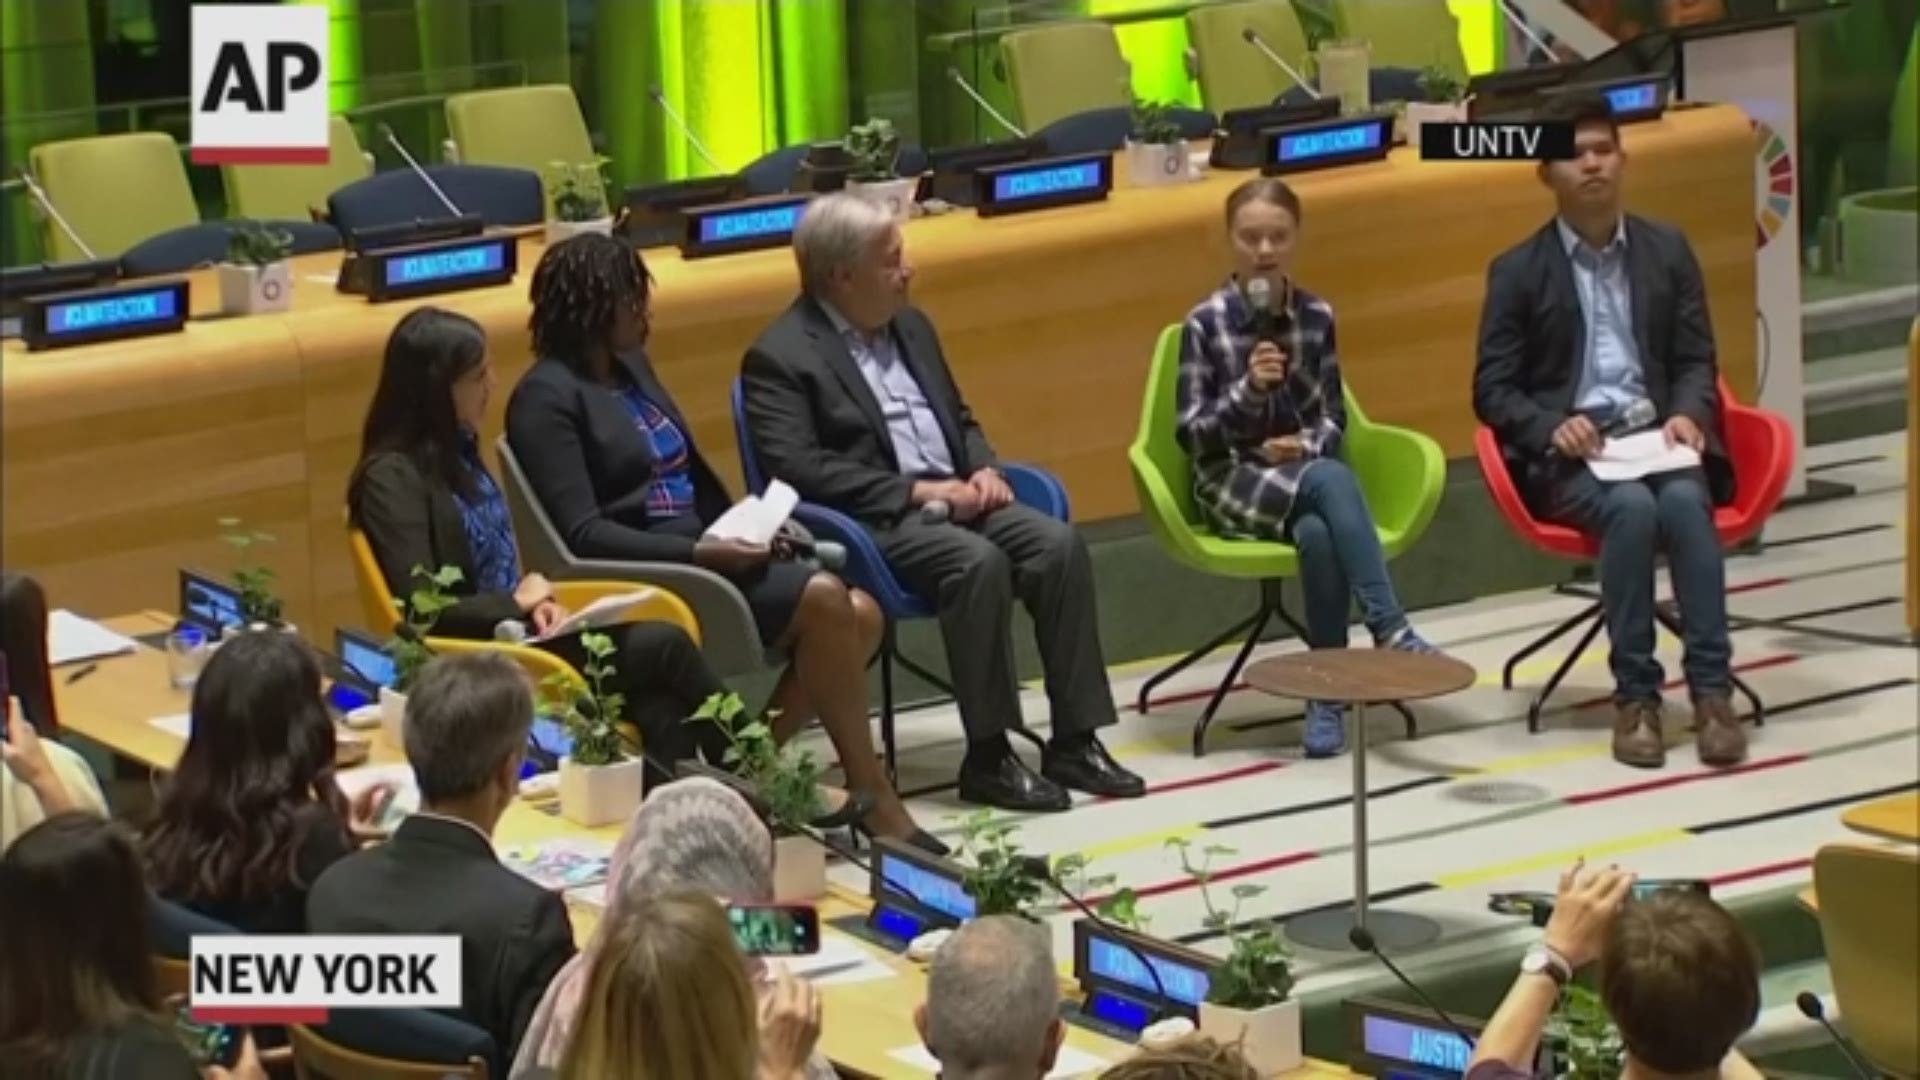 Young people are an 'unstoppable' force in pressuring world leaders to act on climate change,  Thunberg told a U.N. panel. (AP).